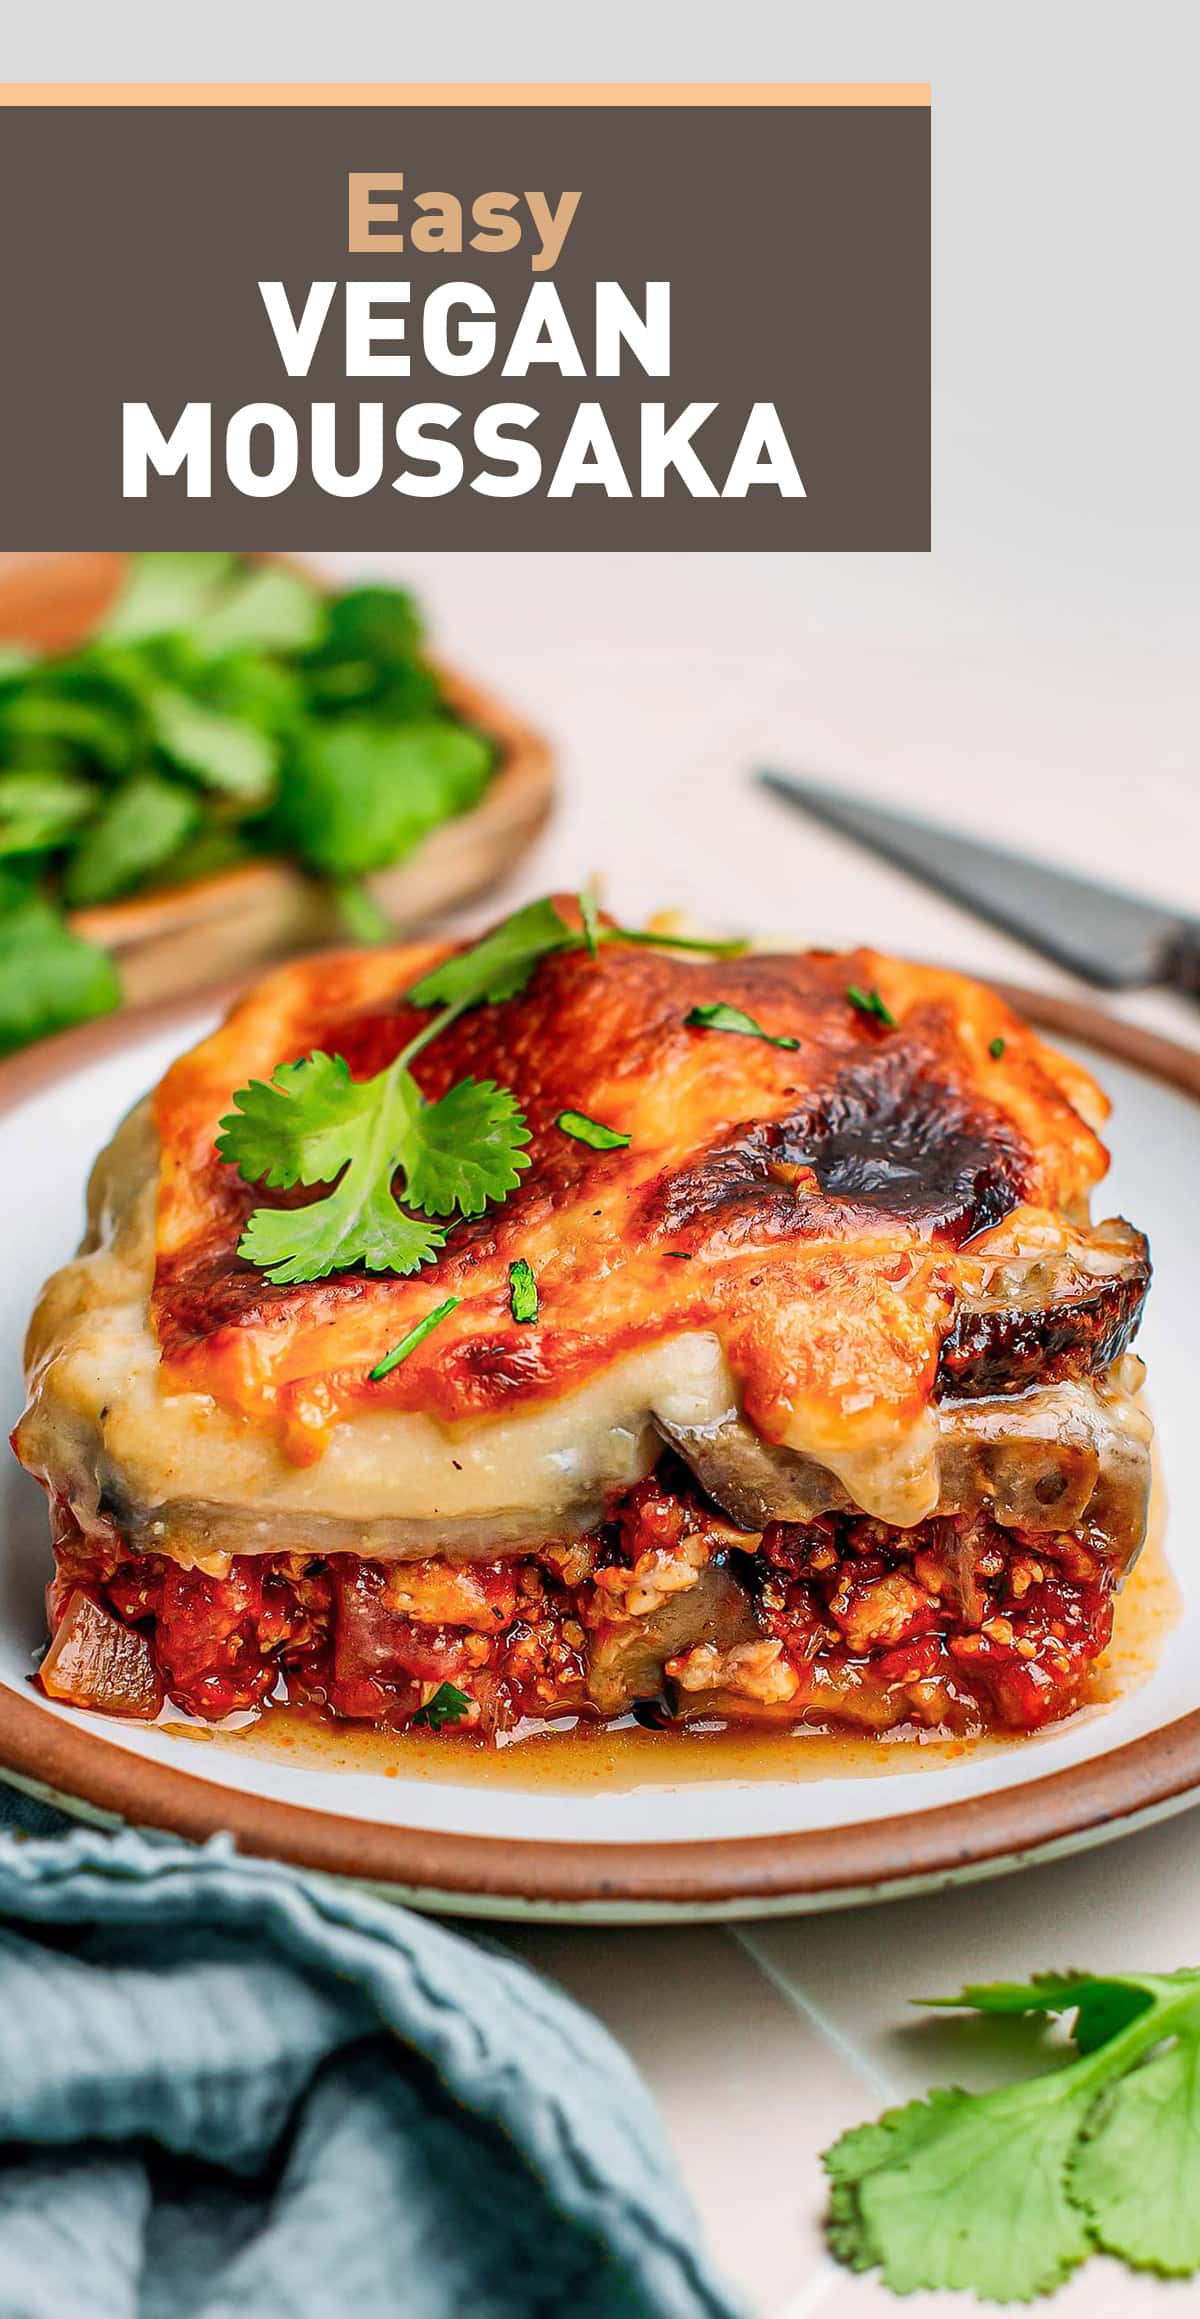 10-ingredient Greek-inspired vegan moussaka! Smoky, meaty, and super flavorful, this baked dish makes the perfect family meal! #plantbased #vegan